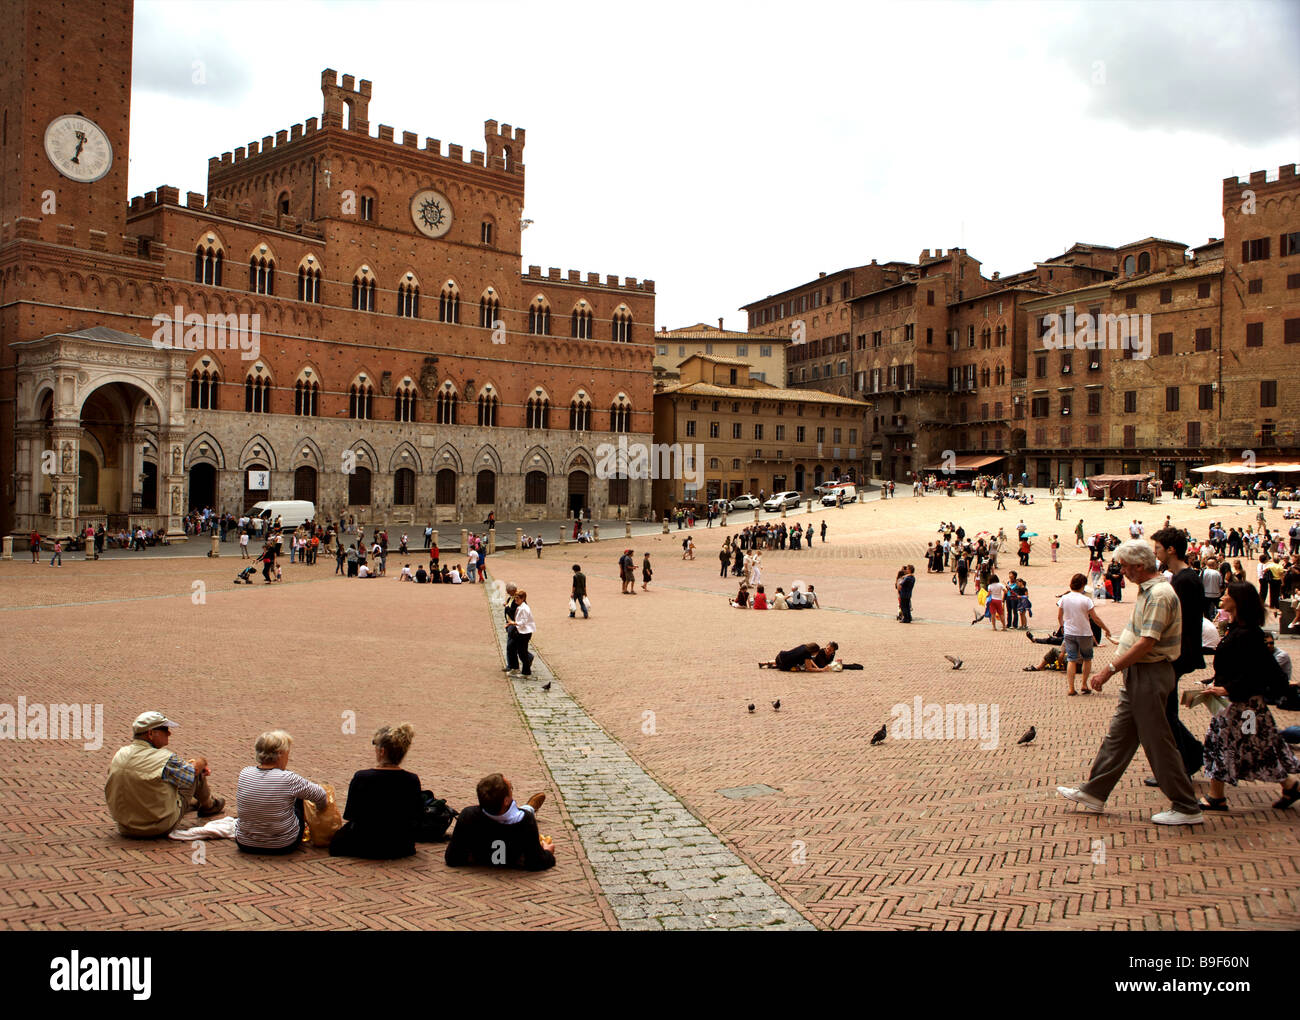 Piazza del Campo, Sienne, Italie Banque D'Images